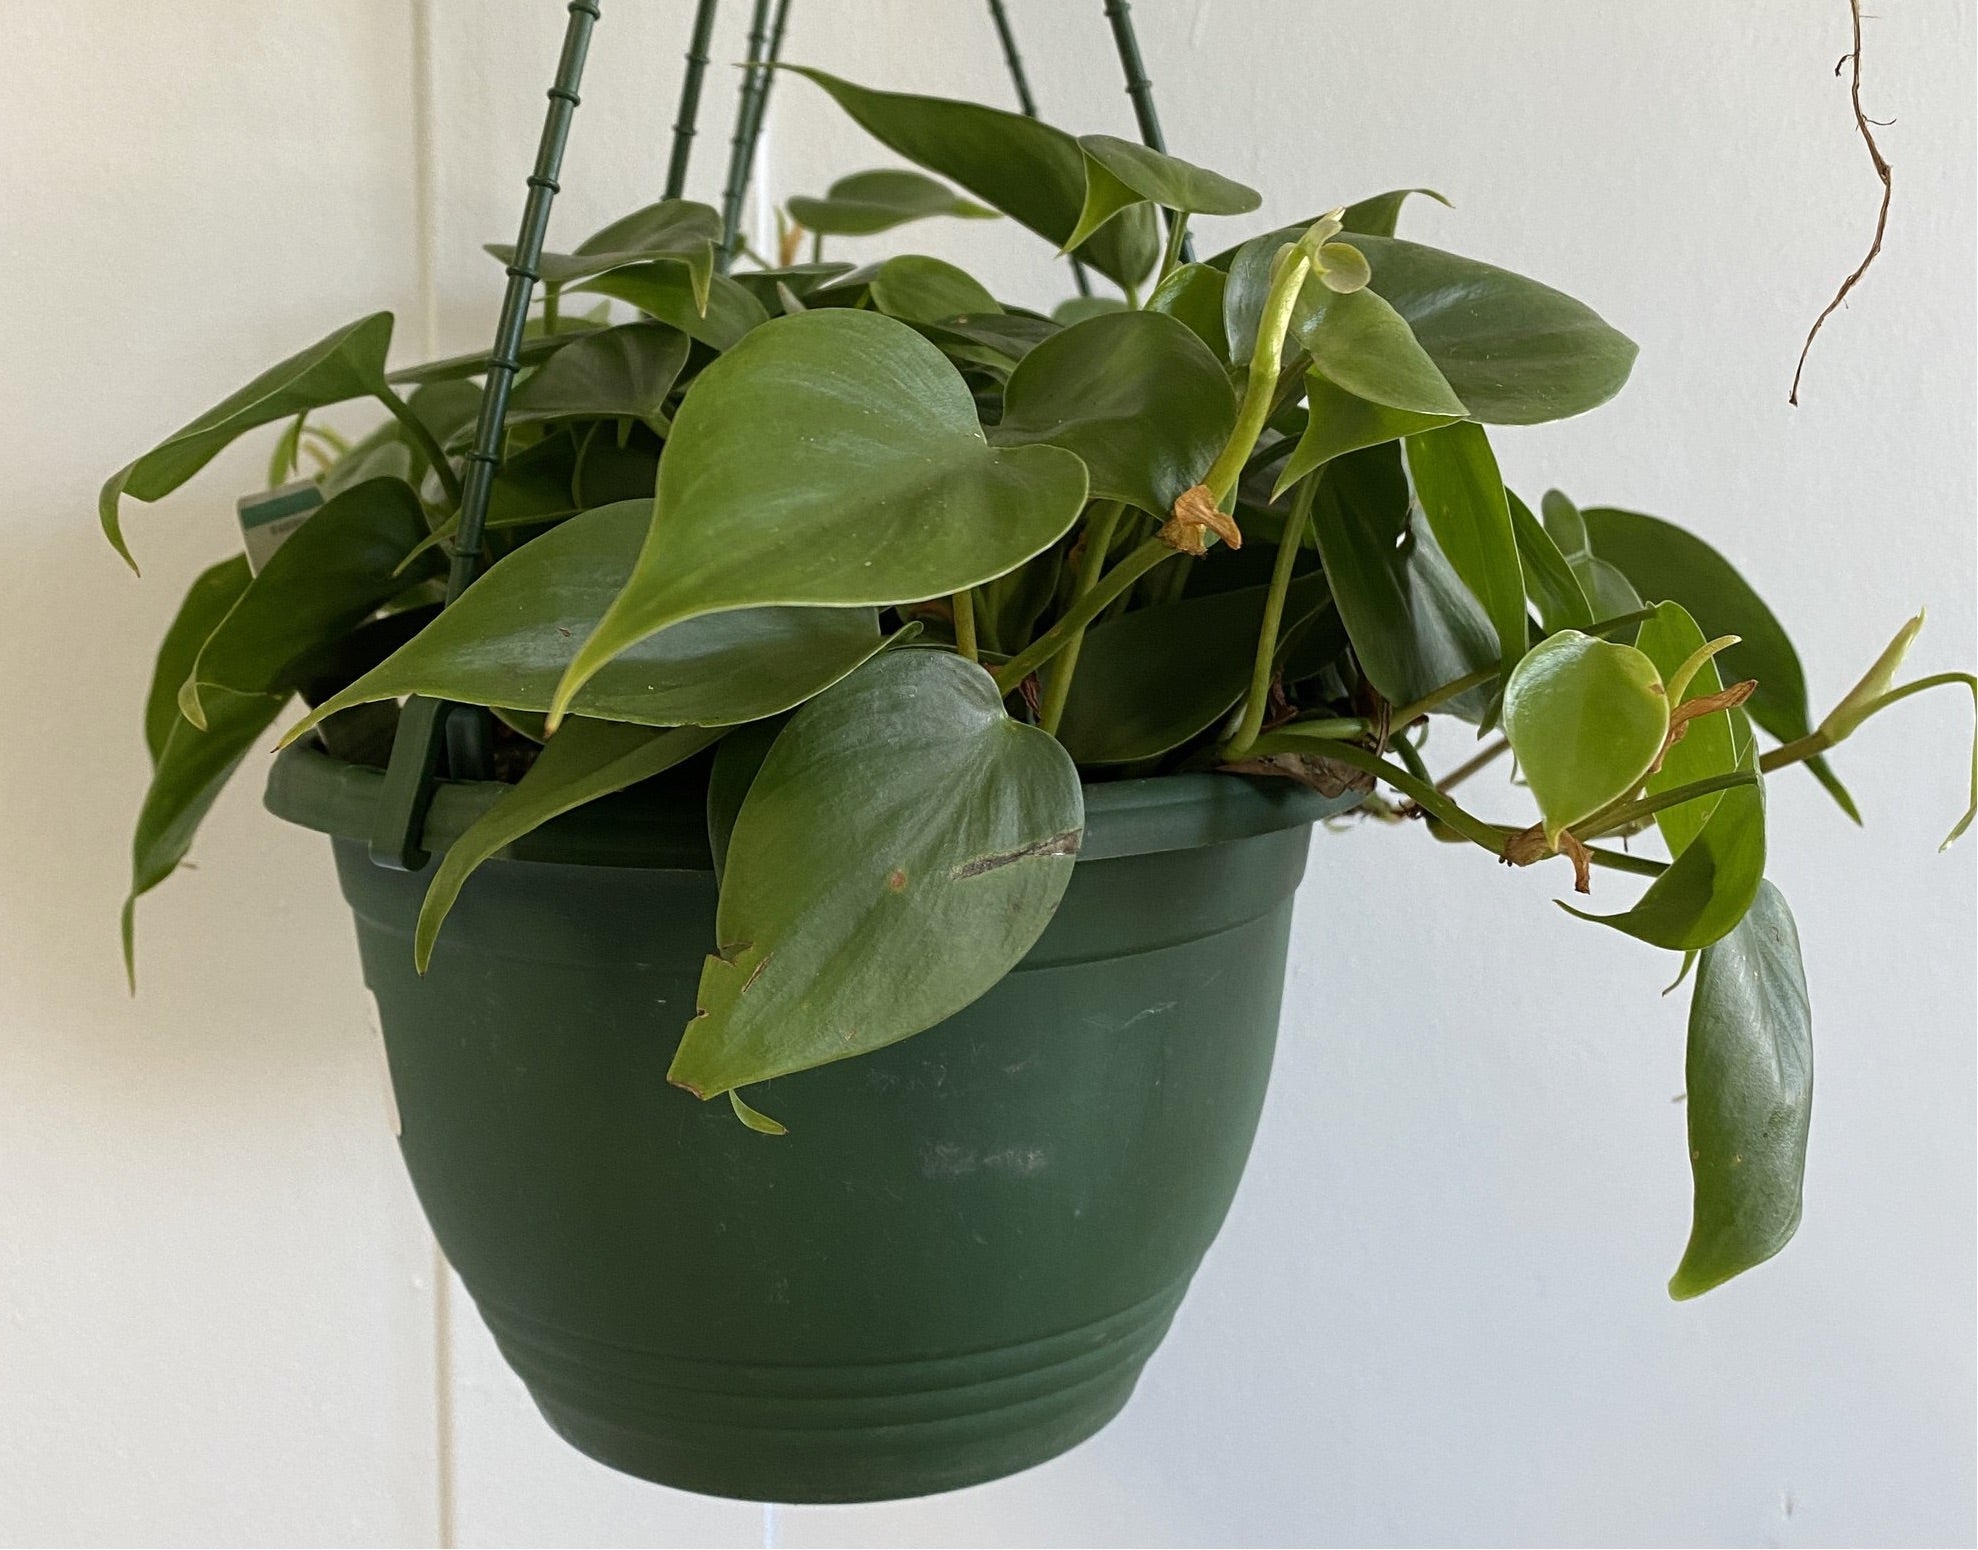 Philodendron sp 'Emerald' - Green Emerald Philodendron